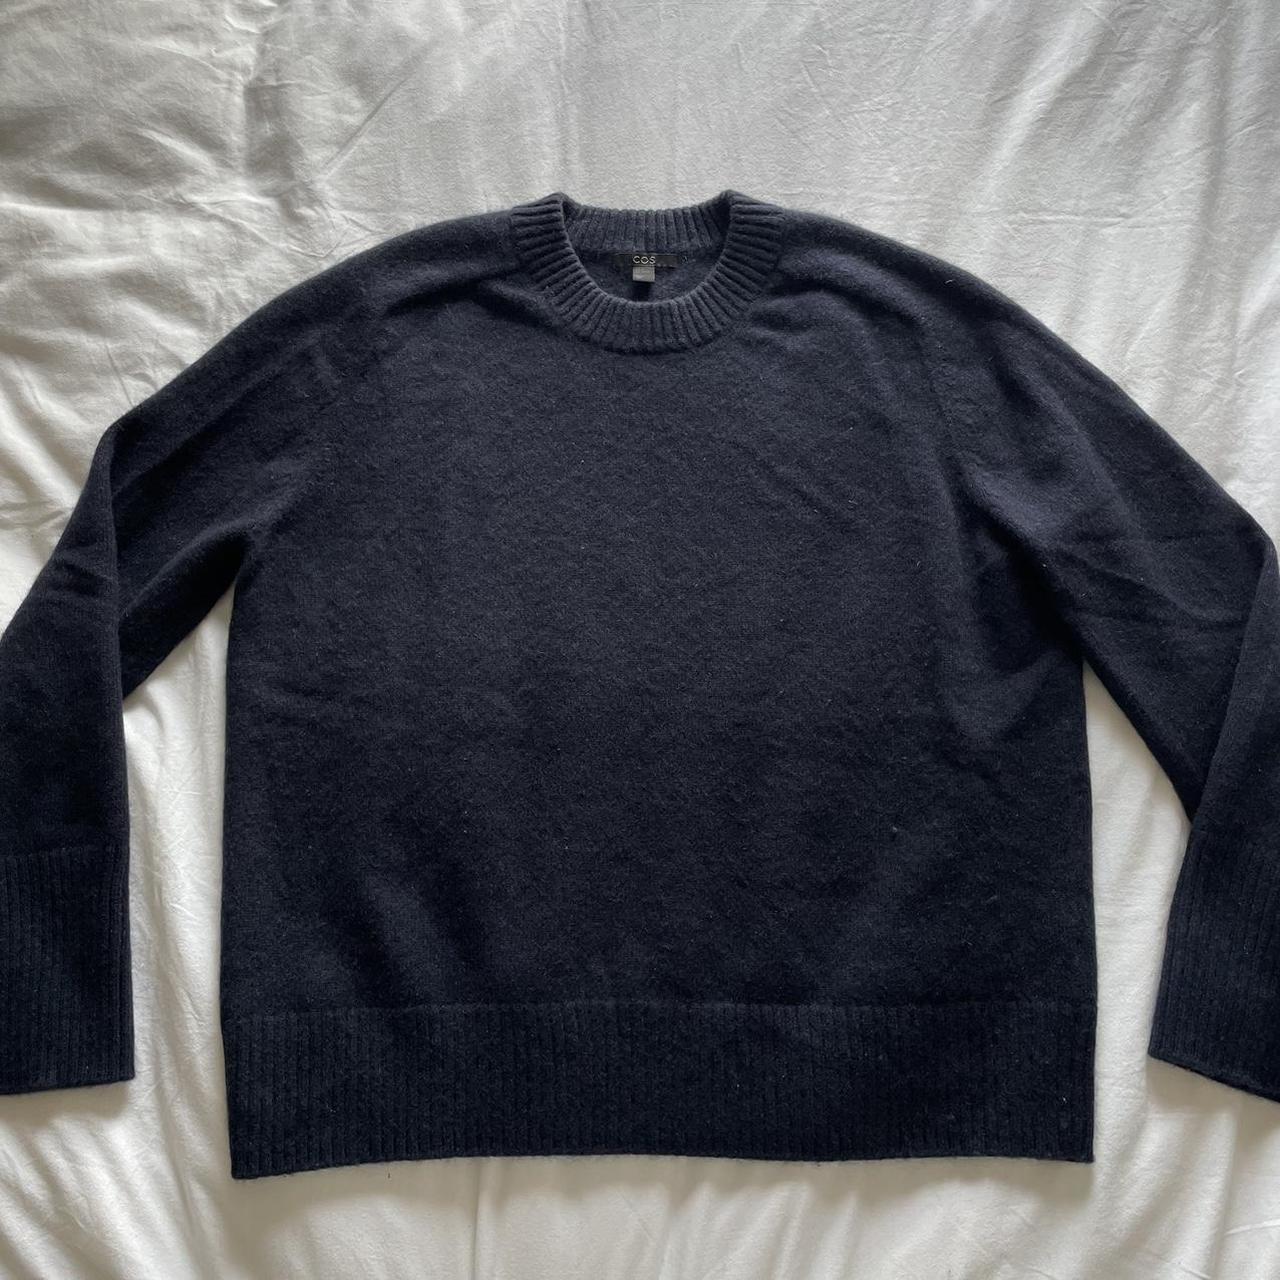 COS classic navy 100% CASHMERE sweater | boxy fit,... - Depop